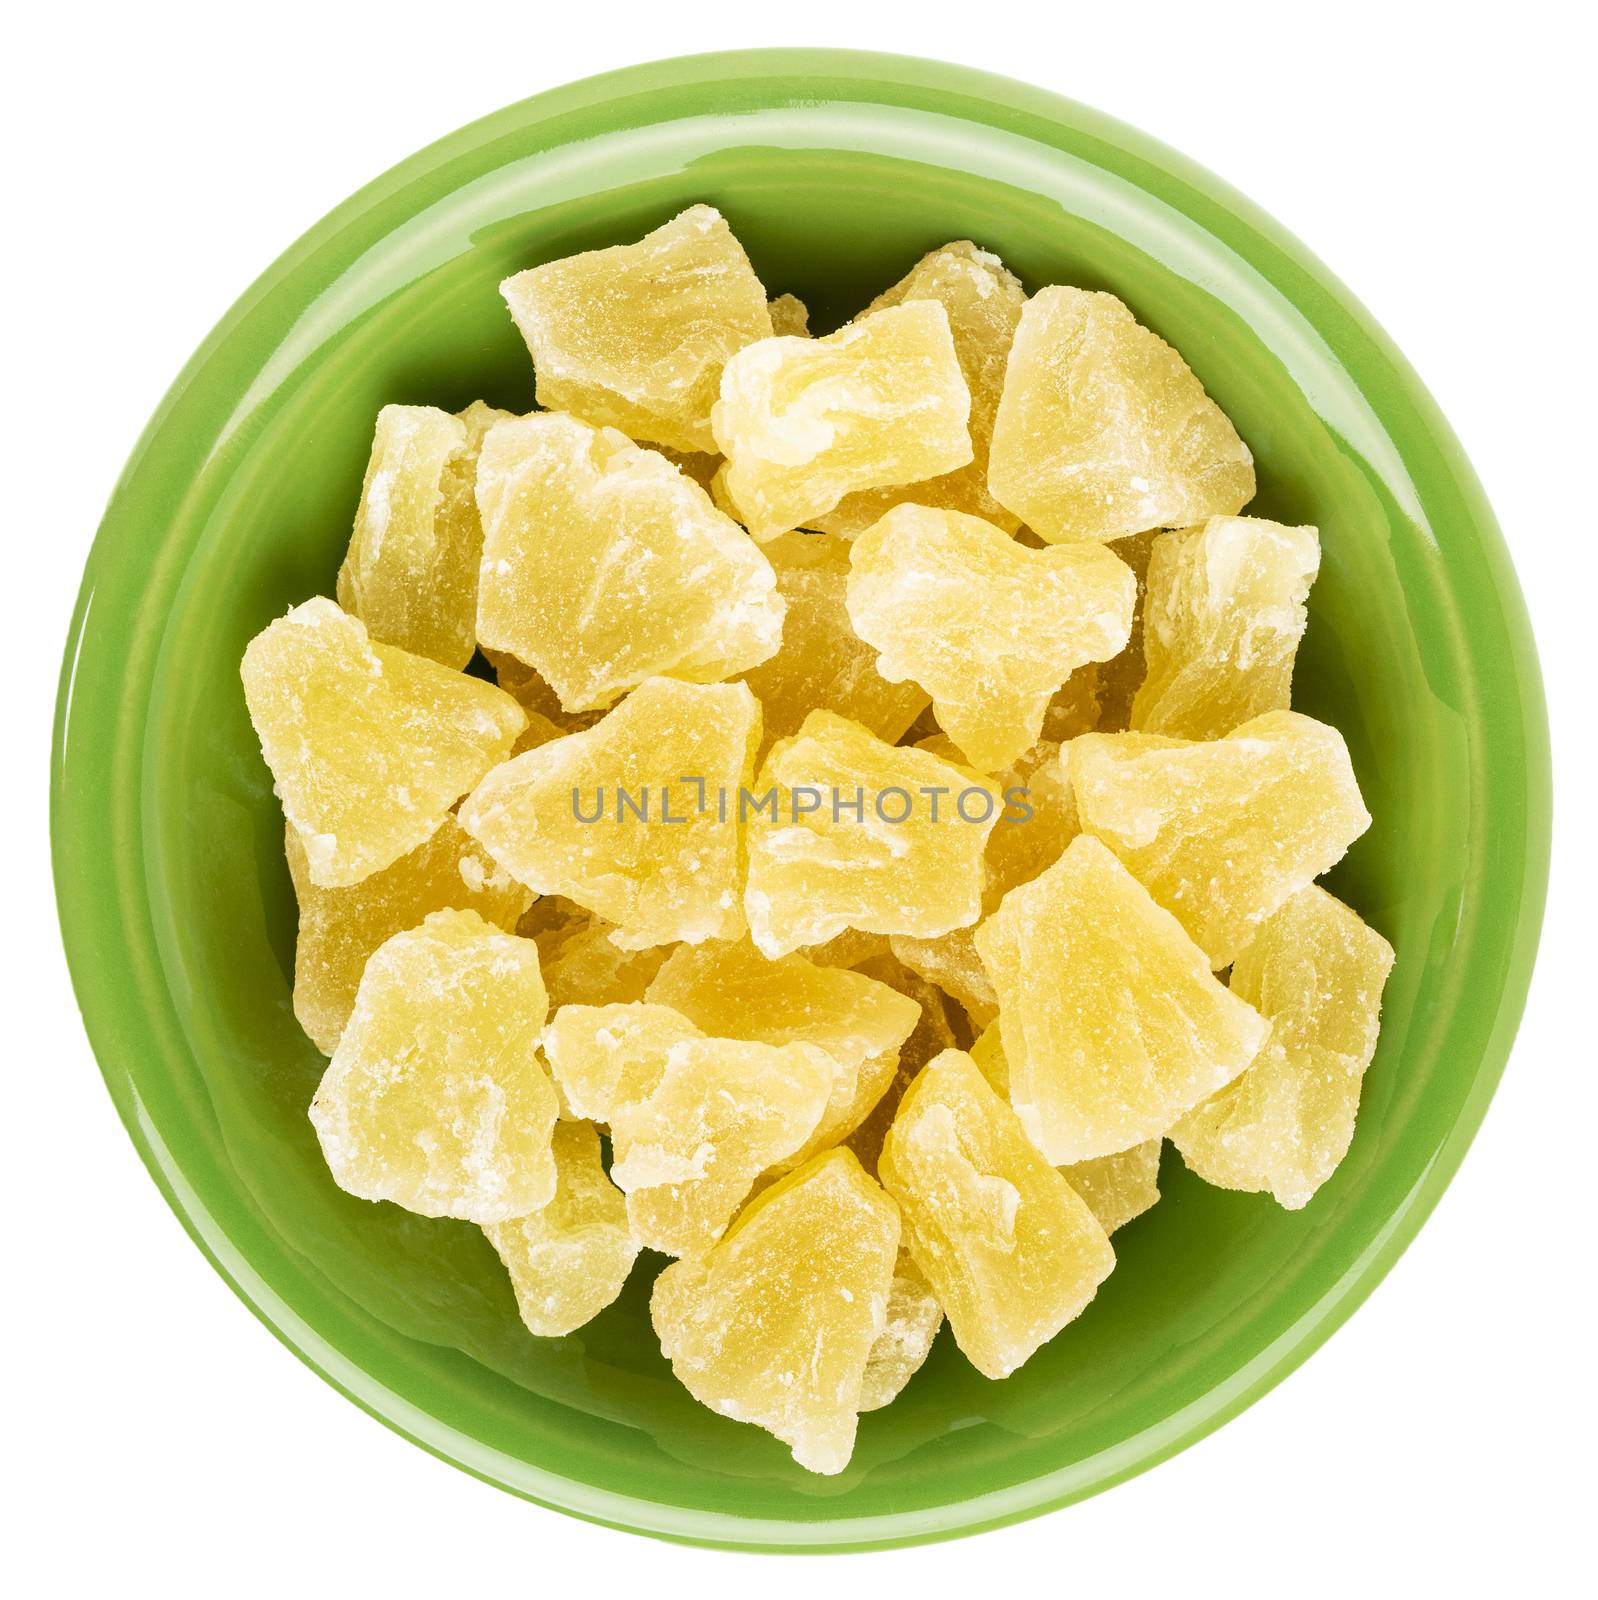 chunks of dried pineapple in an isolated green ceramic bowl